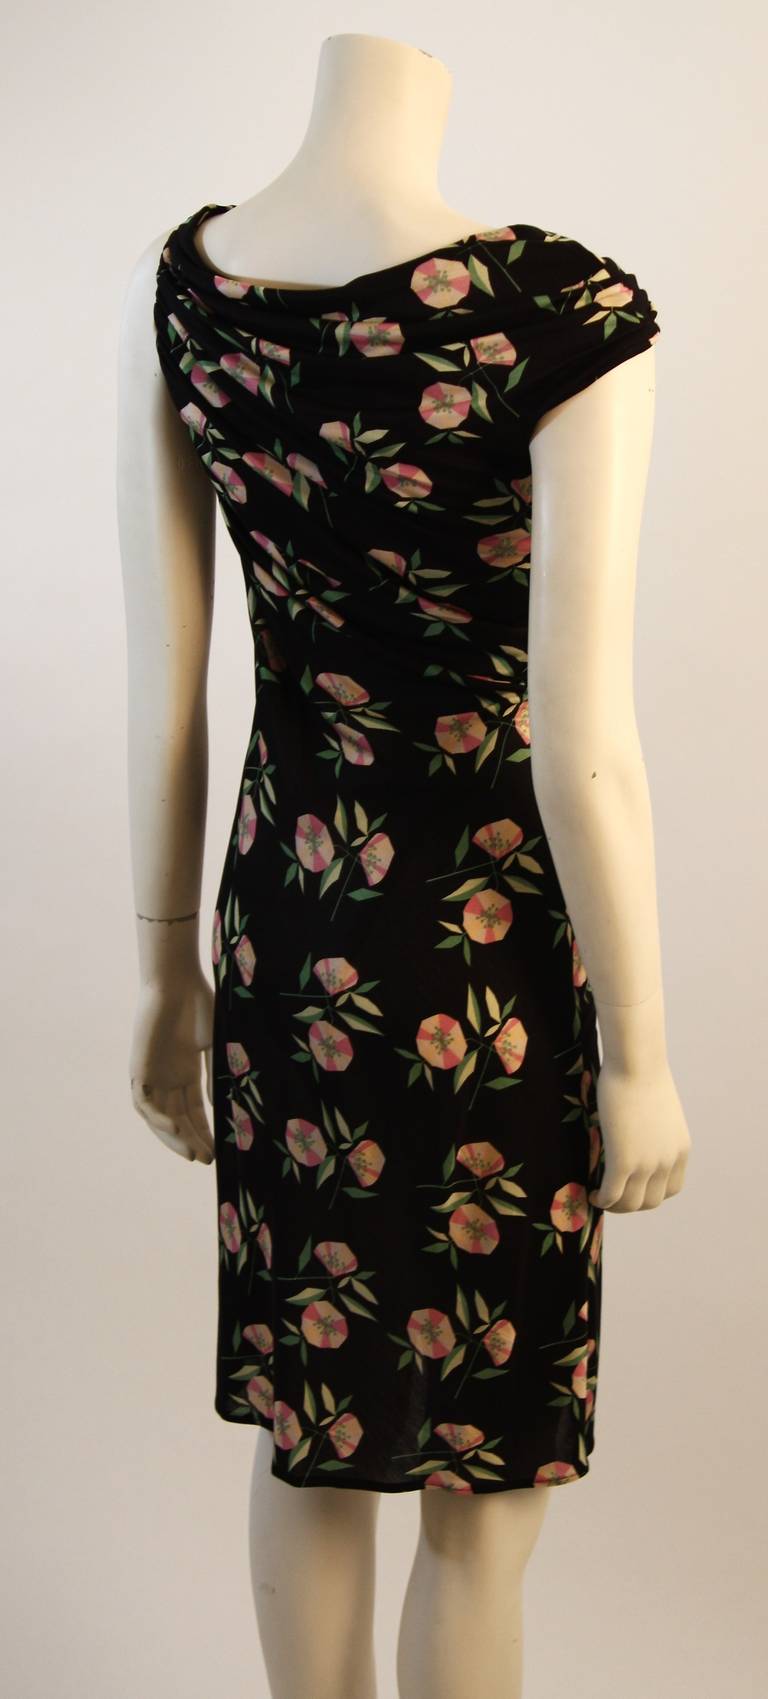 Gianni Versace Black with Pink Roses Ruched Silk Jersey Dress Size 40 For Sale 2